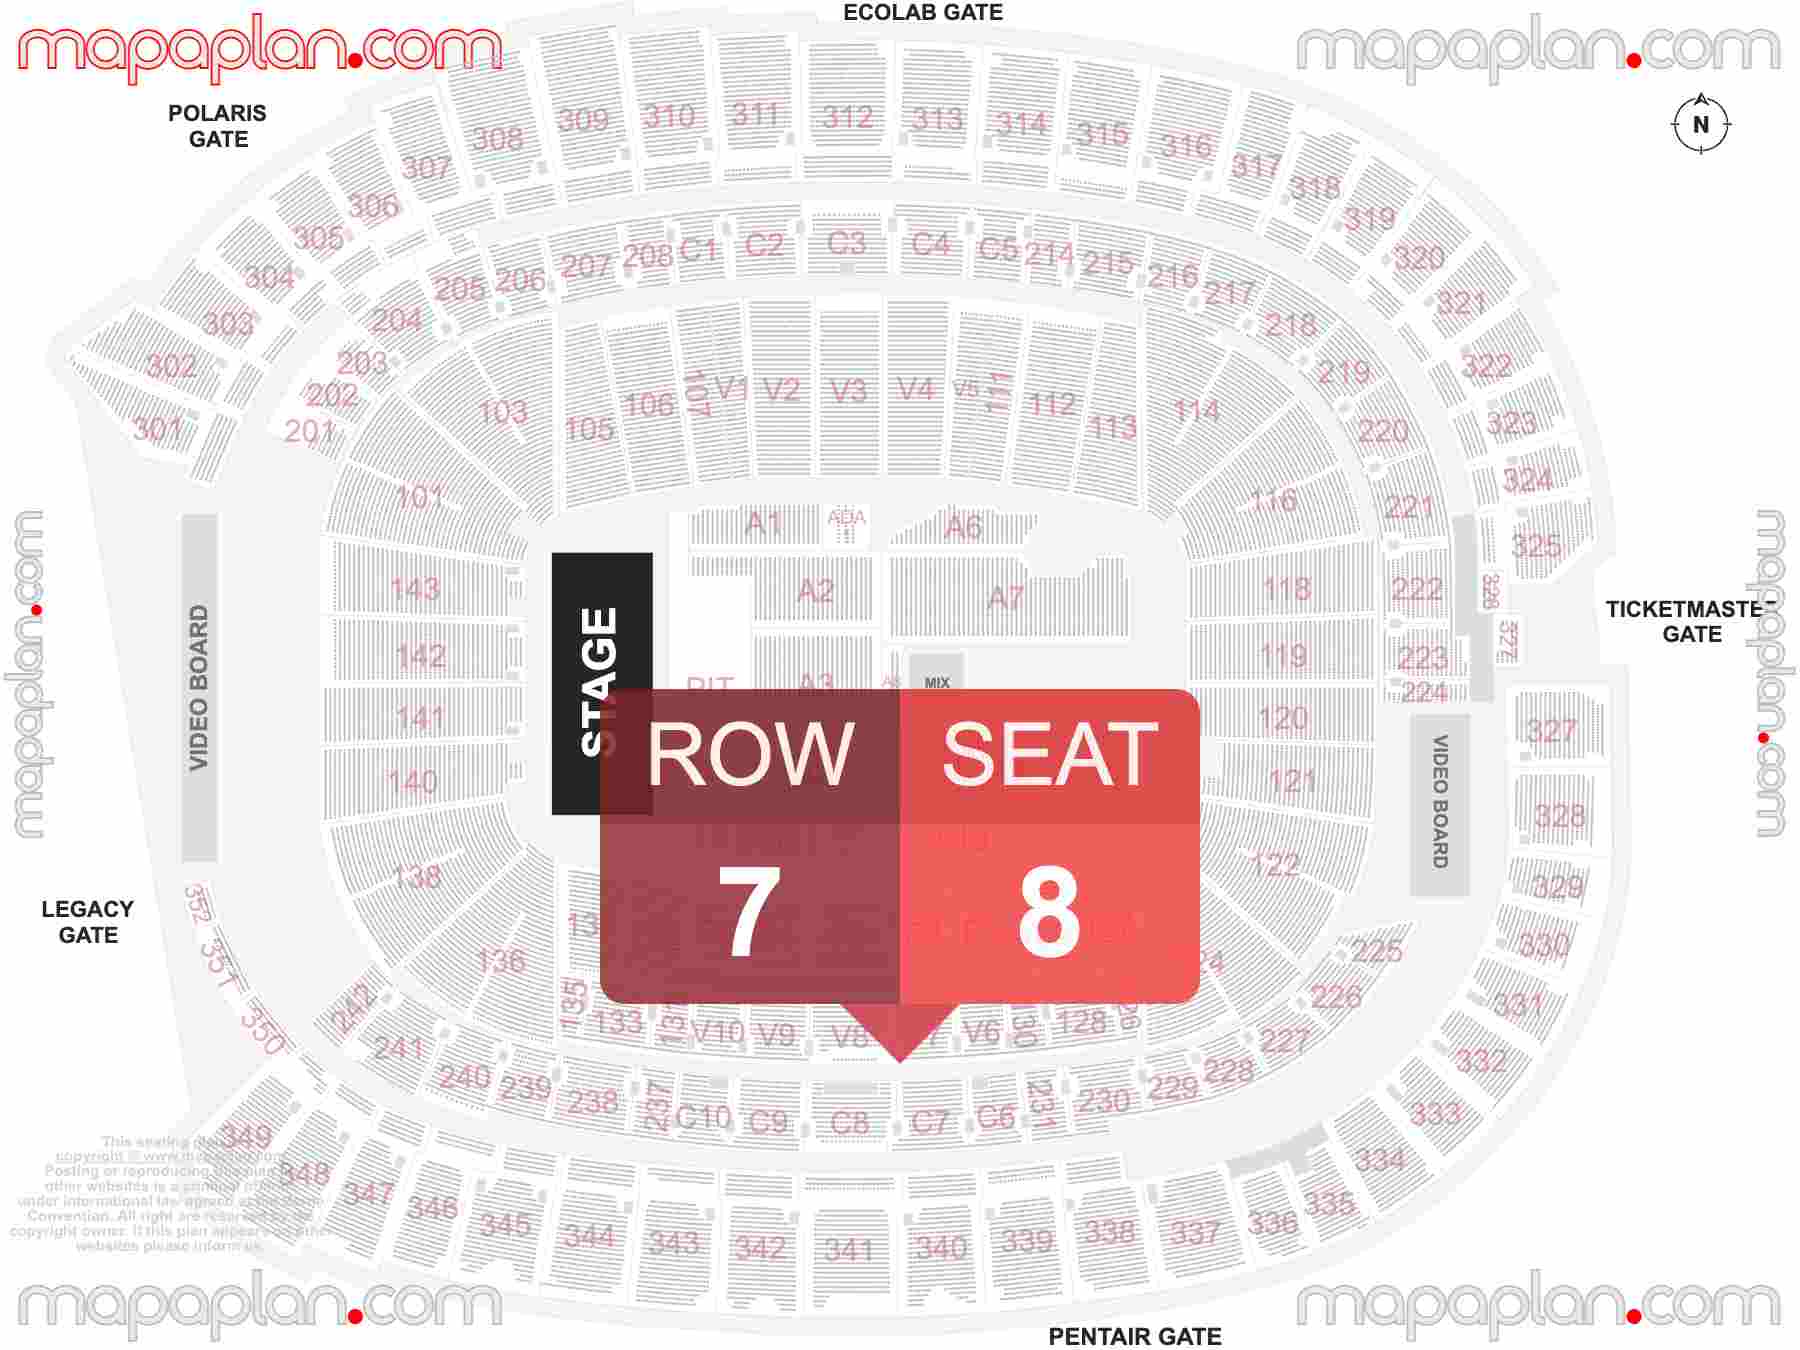 Minneapolis U.S. Bank Stadium seating chart Concert detailed seat numbers and row numbering chart with interactive map plan layout